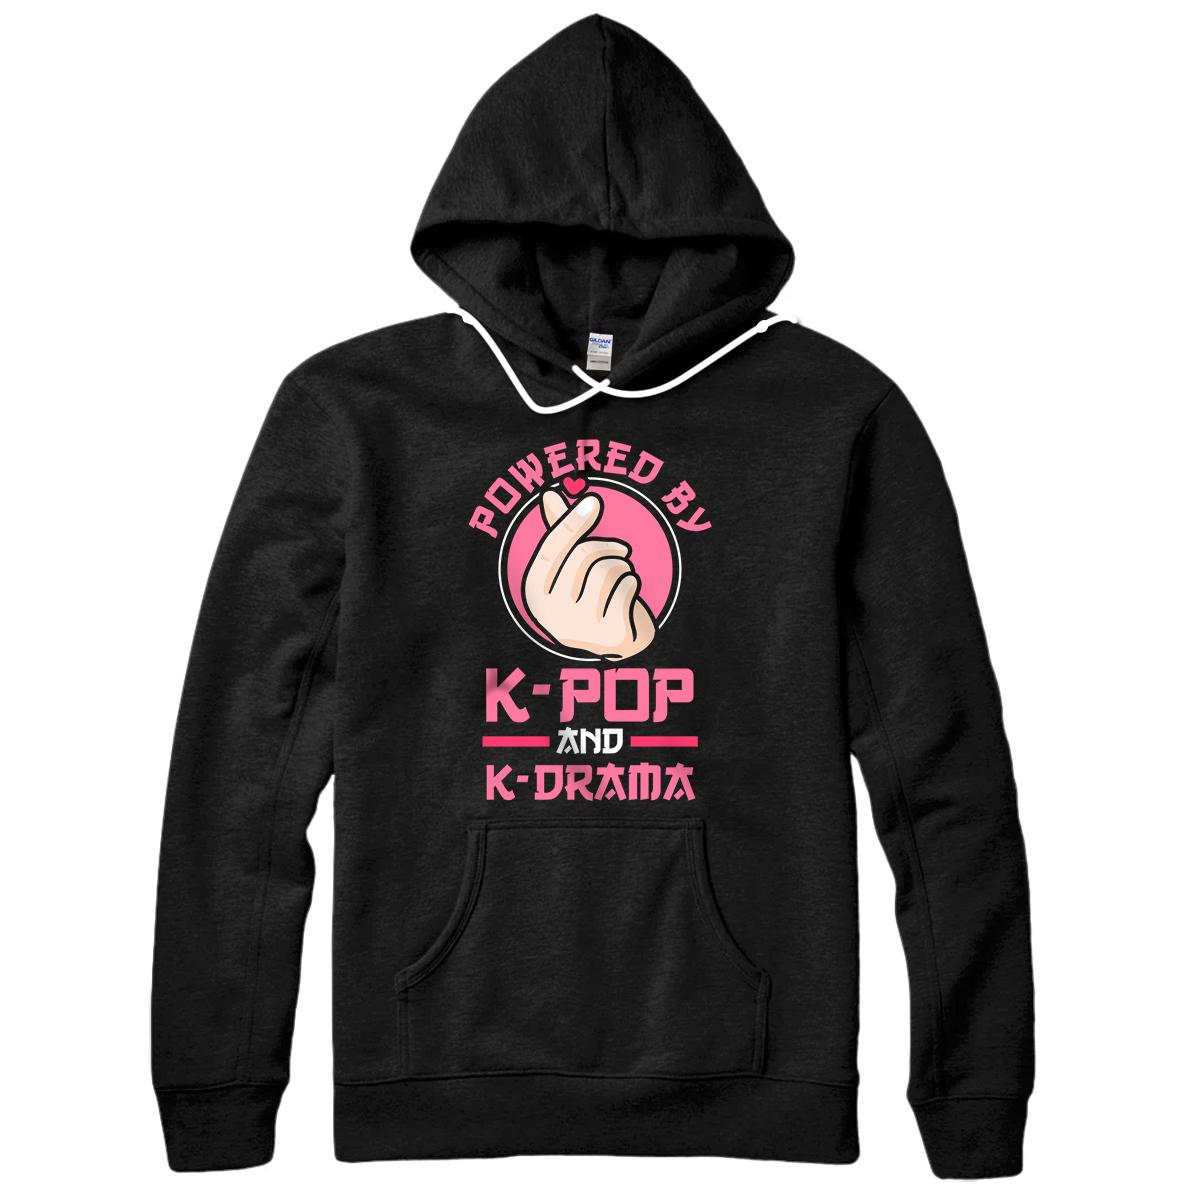 Personalized Powered by K-pop and K-Drama Kpop Merch Merchandise Gift Pullover Hoodie